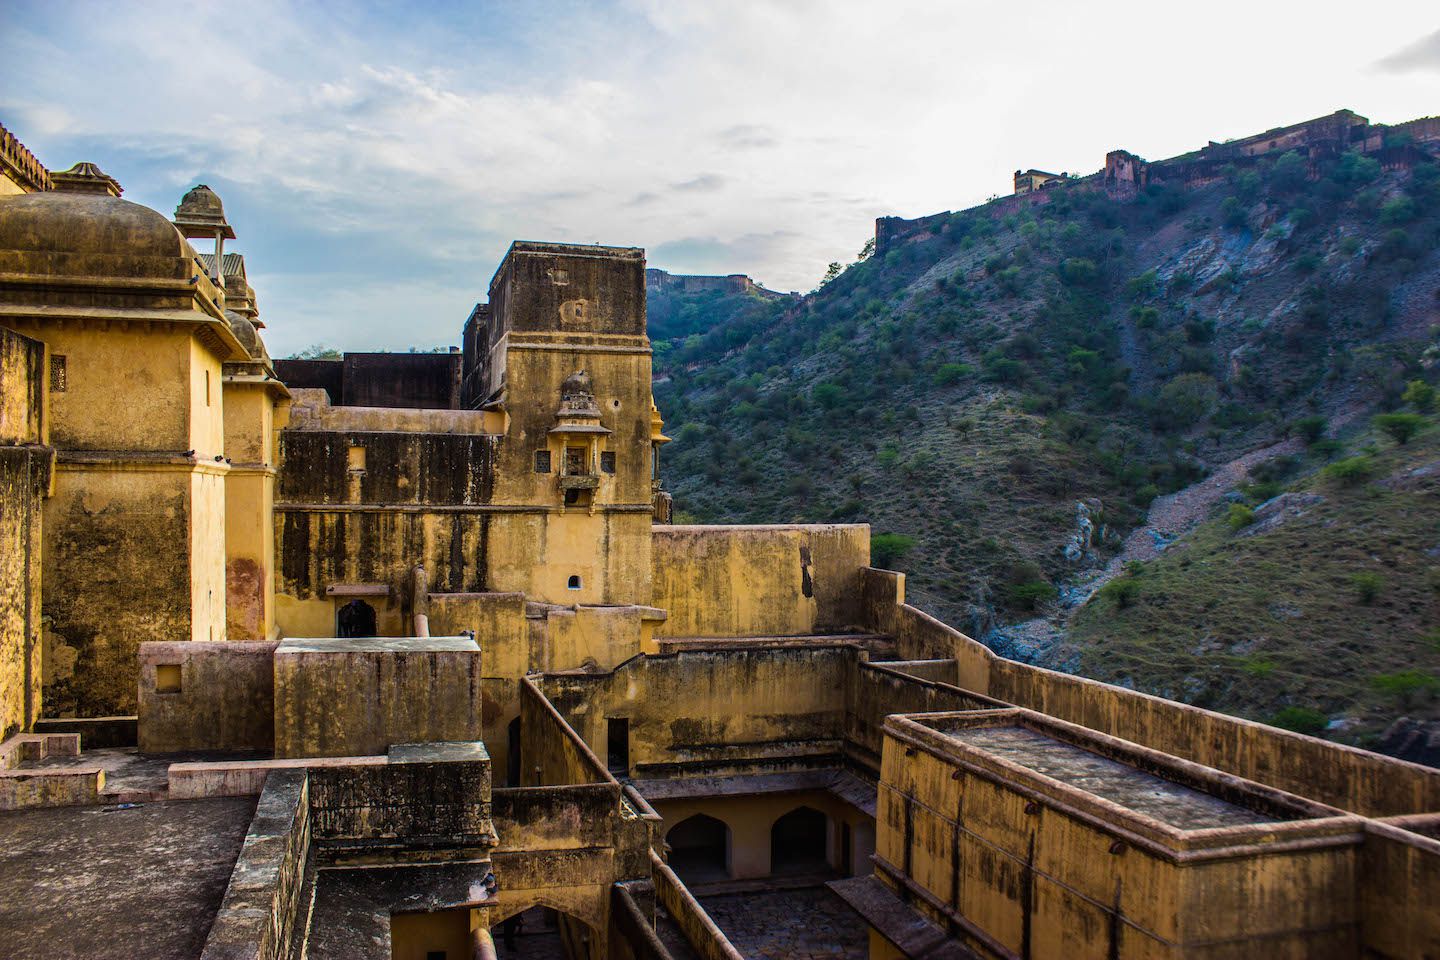 Traces of Persian architecture at Amer Fort, Jaipur, India